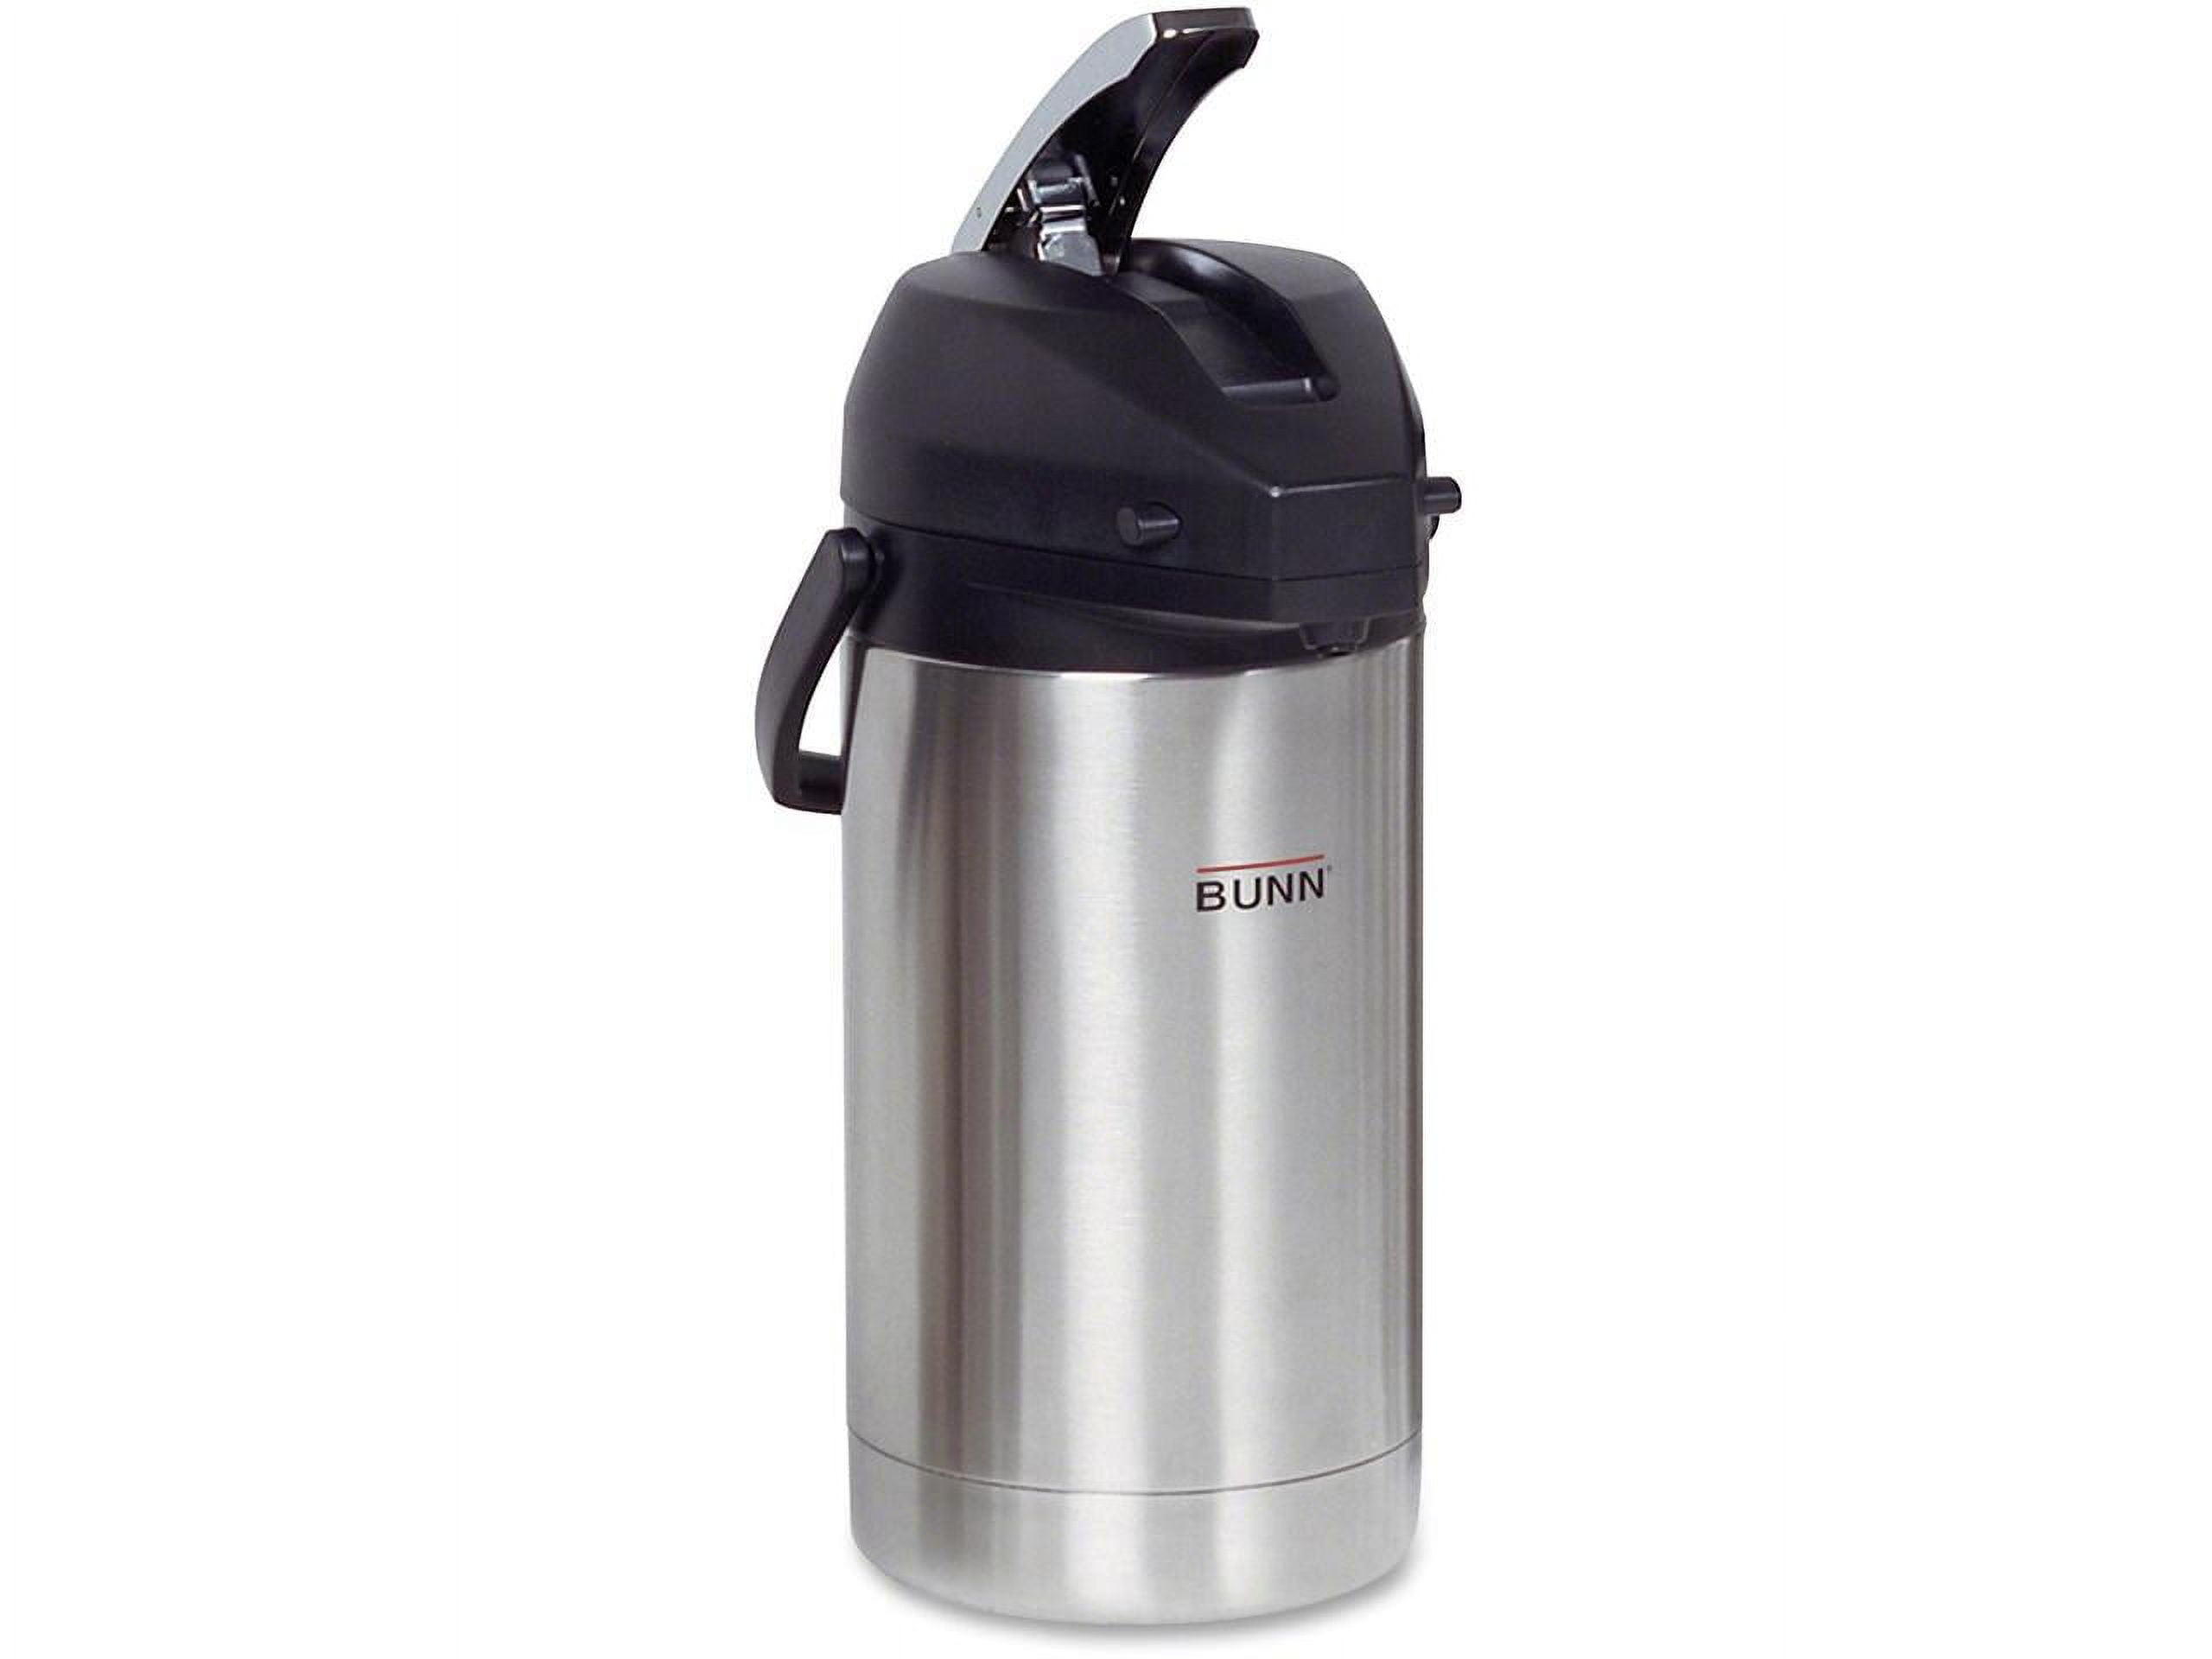 Oukaning 3.17Gal 304 Stainless Steel Insulated Thermal Hot and